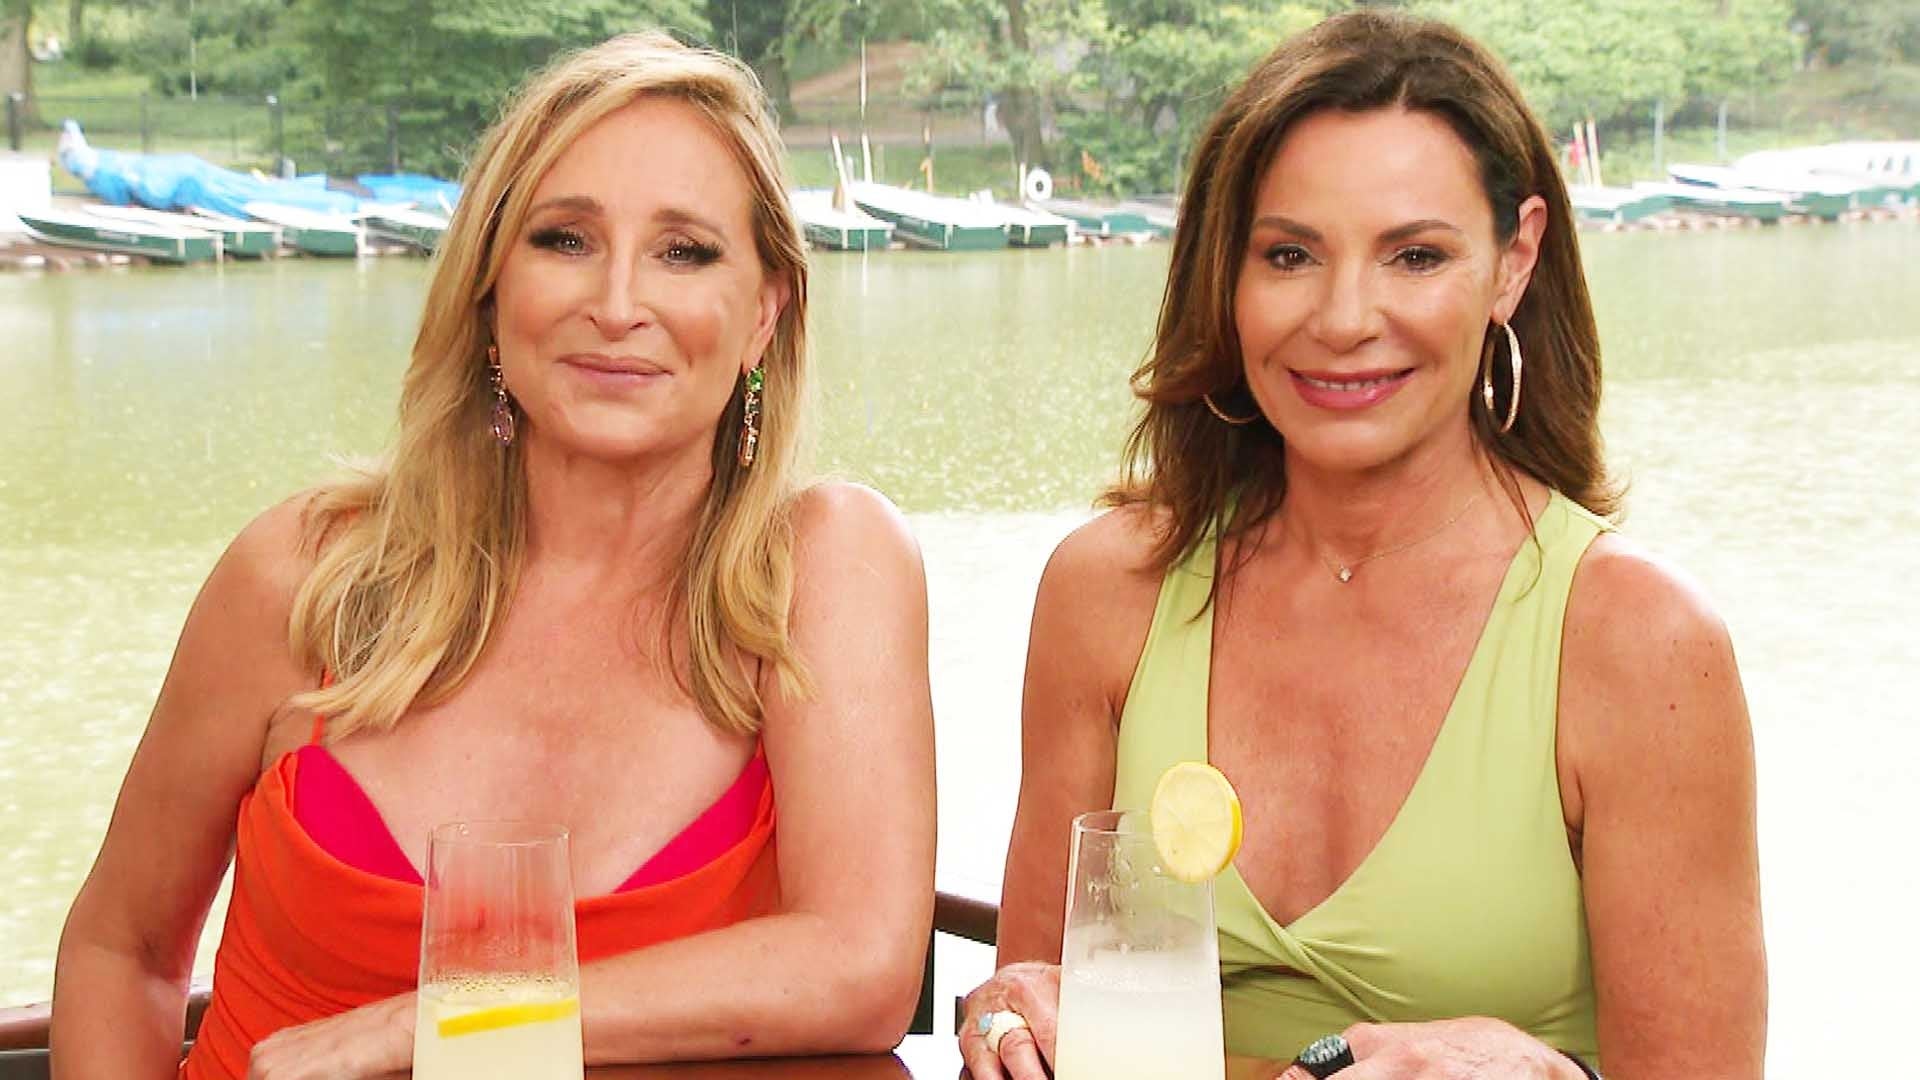 Luann de Lesseps & Sonja Morgan on Which ‘Housewife’ They Never Want to See Again (Exclusive)